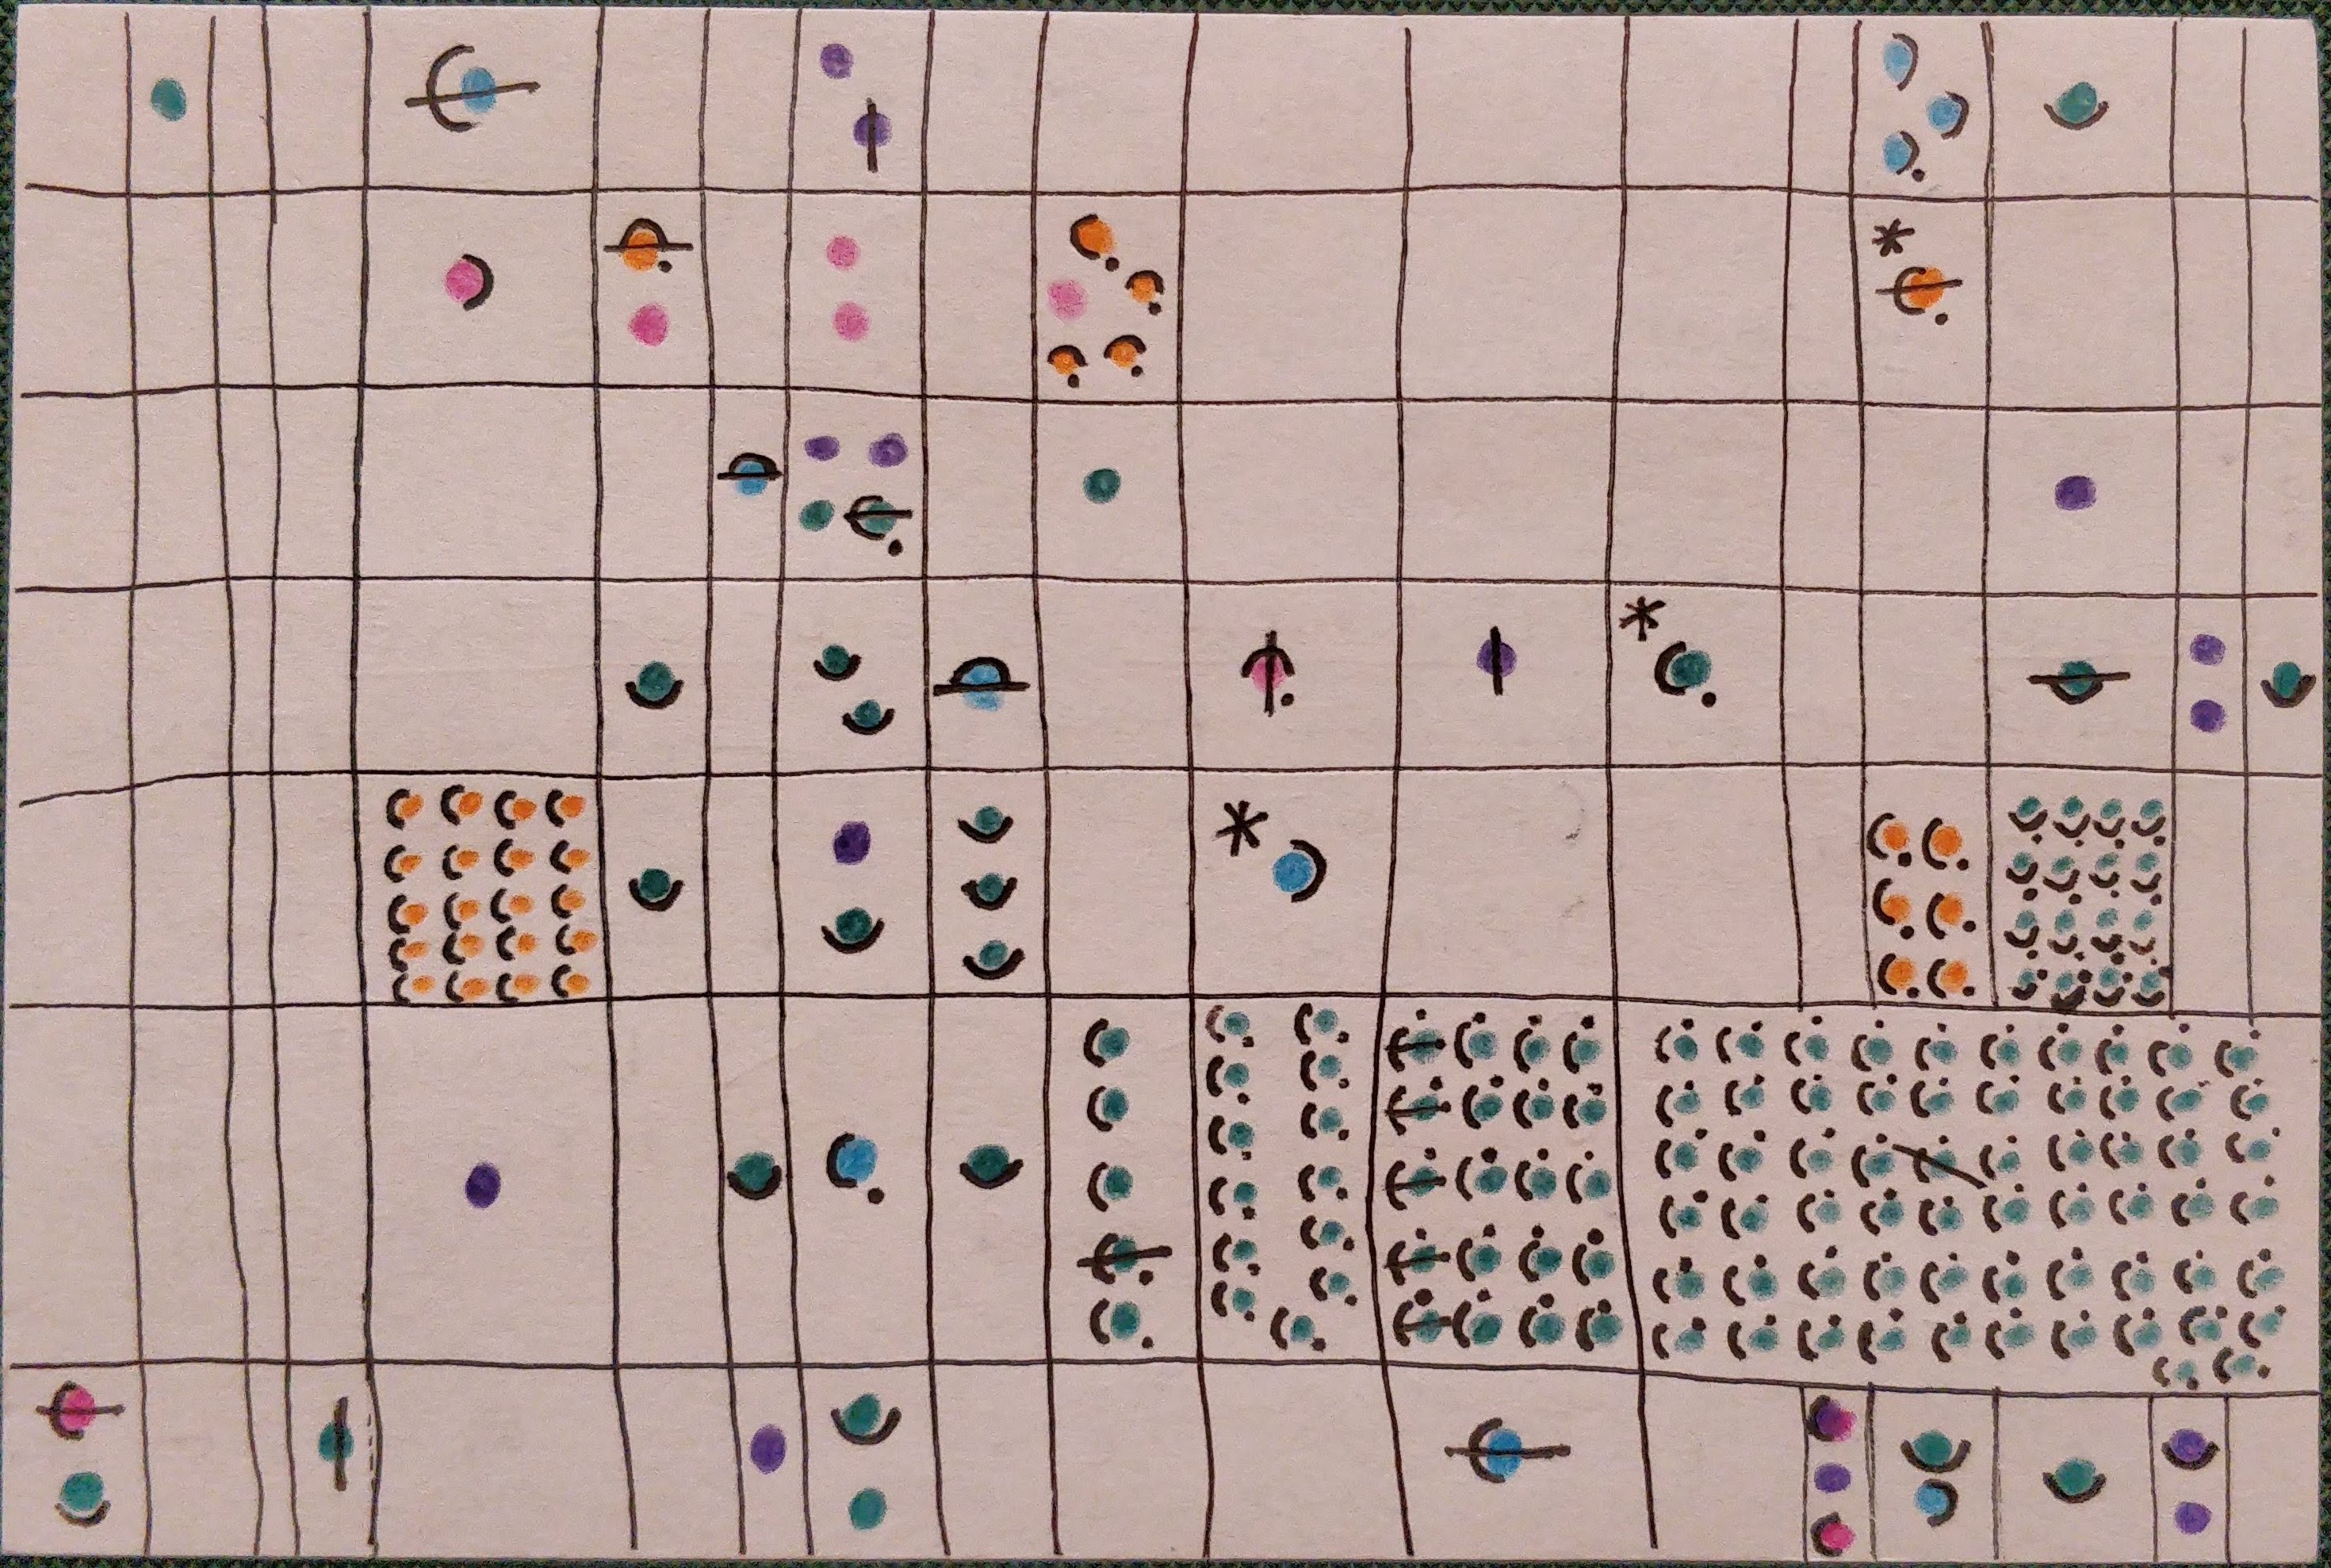 The final visualization: a multitude of colorful hand-drawn symbols in a grid